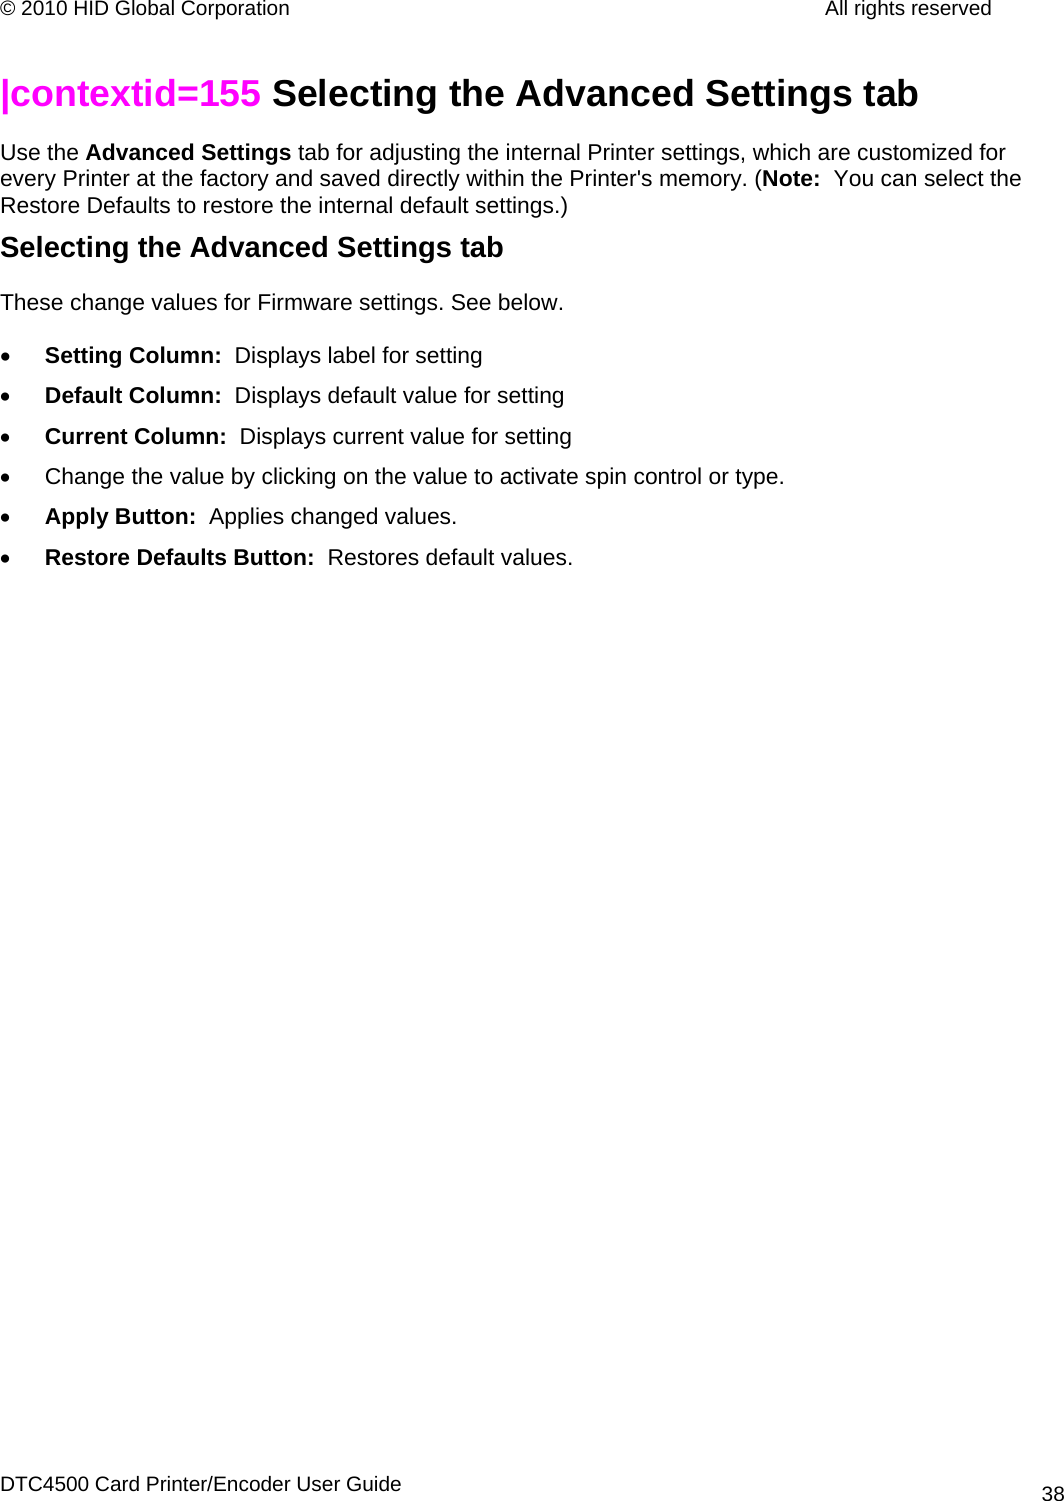 © 2010 HID Global Corporation         All rights reserved  |contextid=155 Selecting the Advanced Settings tab  Use the Advanced Settings tab for adjusting the internal Printer settings, which are customized for every Printer at the factory and saved directly within the Printer&apos;s memory. (Note:  You can select the Restore Defaults to restore the internal default settings.)  Selecting the Advanced Settings tab  These change values for Firmware settings. See below. • Setting Column:  Displays label for setting • Default Column:  Displays default value for setting • Current Column:  Displays current value for setting •  Change the value by clicking on the value to activate spin control or type. • Apply Button:  Applies changed values. • Restore Defaults Button:  Restores default values.  DTC4500 Card Printer/Encoder User Guide 38